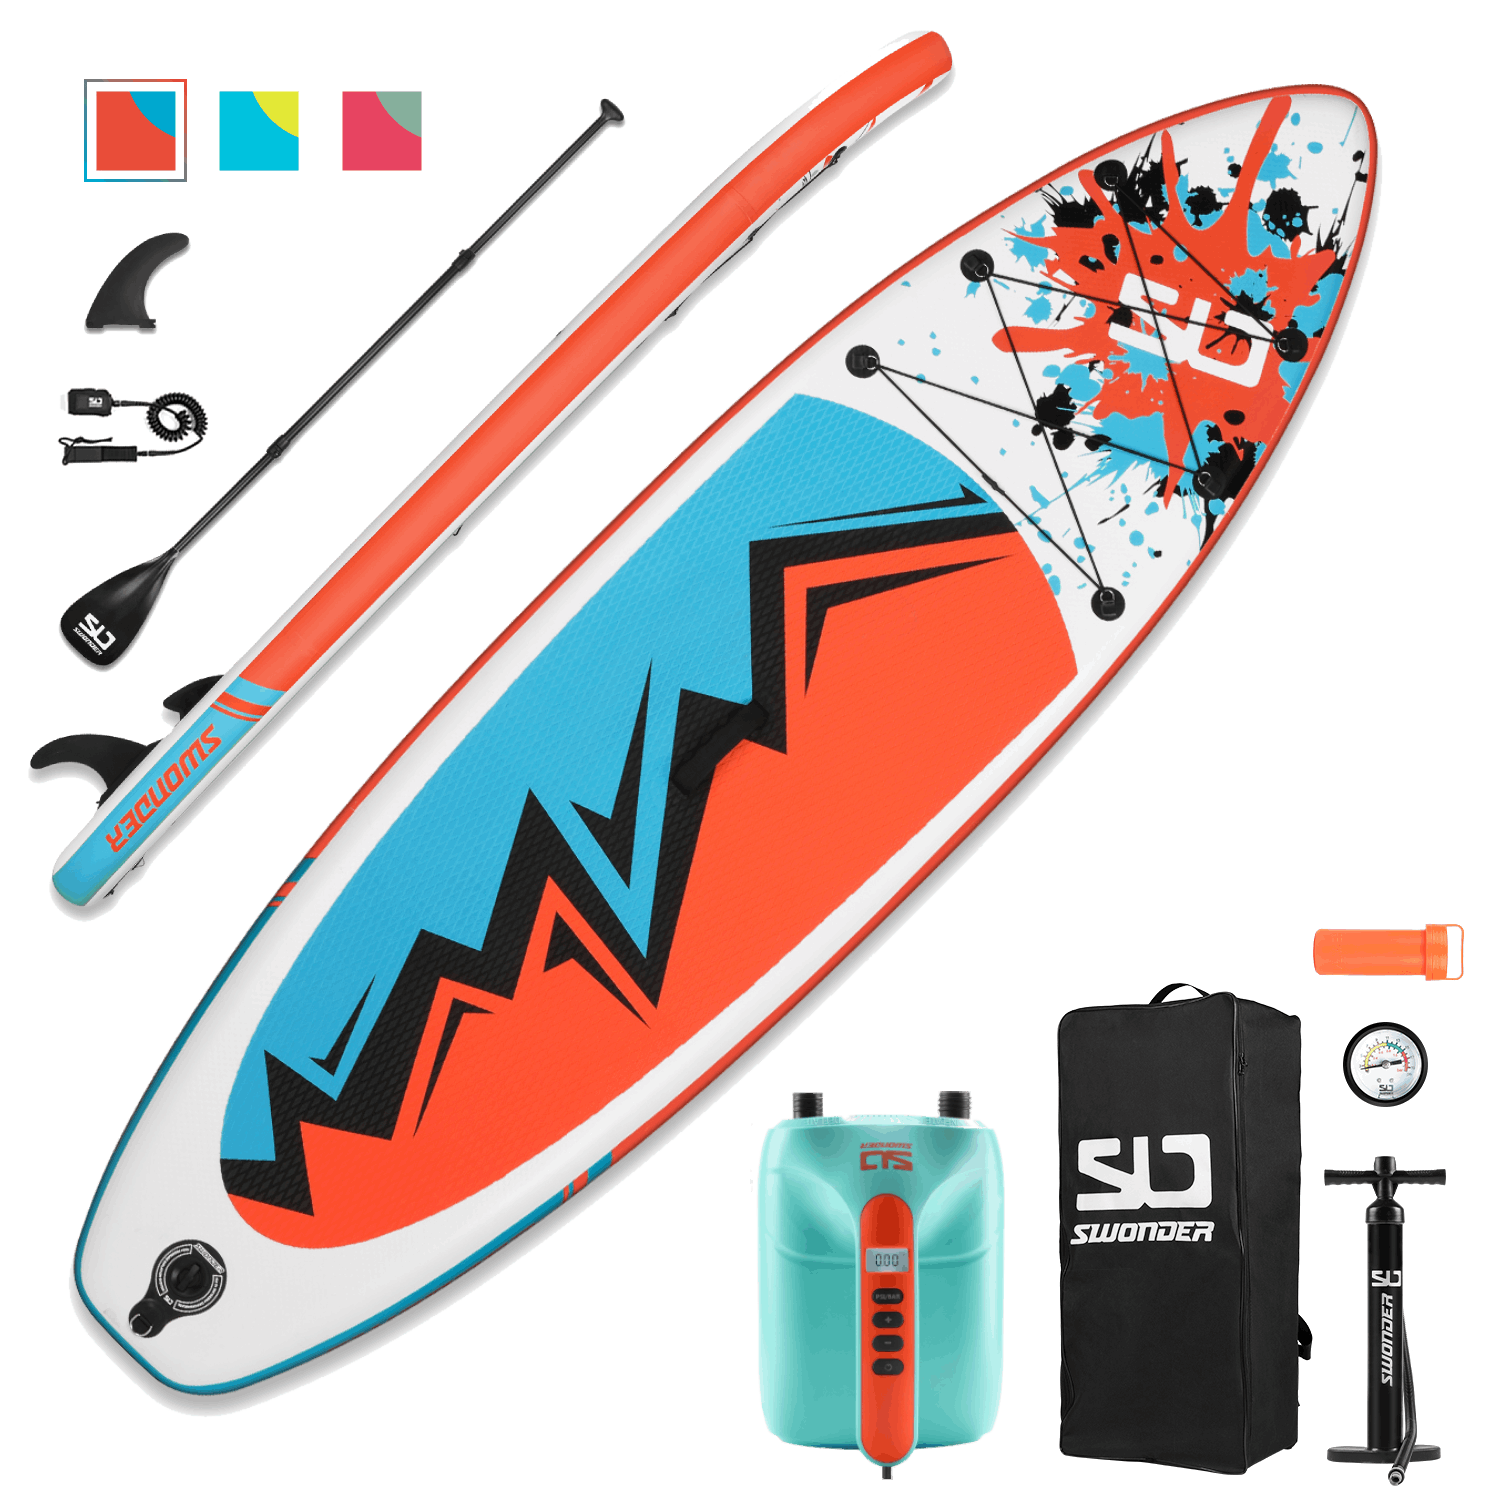 Bundle Deal - 10' Inflatable Stand-Up Paddle Board Set & E-Pump